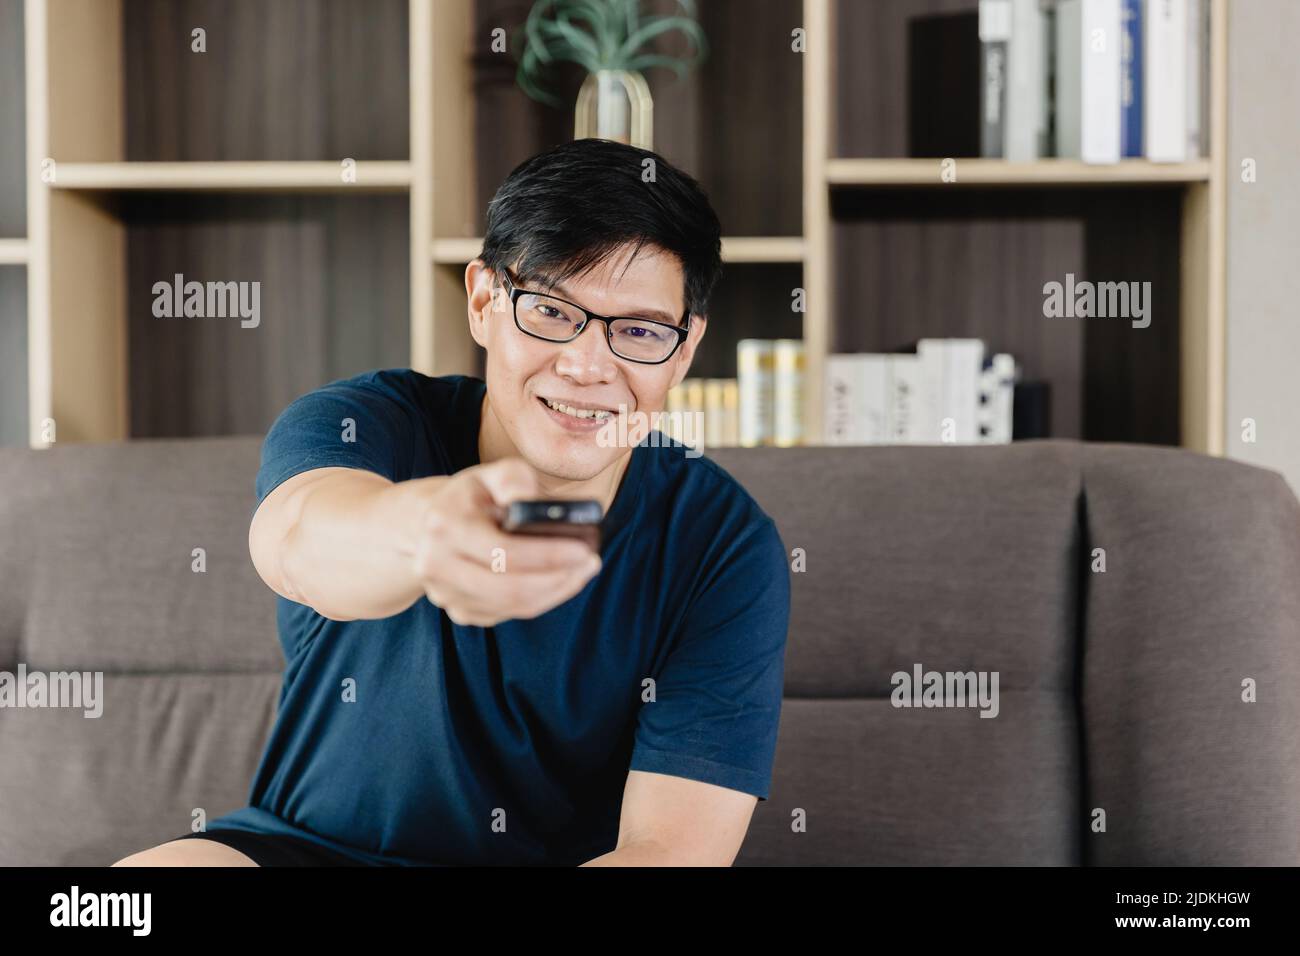 Man Happy Smile Pointing Tv Remote Control For Watching Home Entertainment Program At Holiday Weekend. Stock Photo